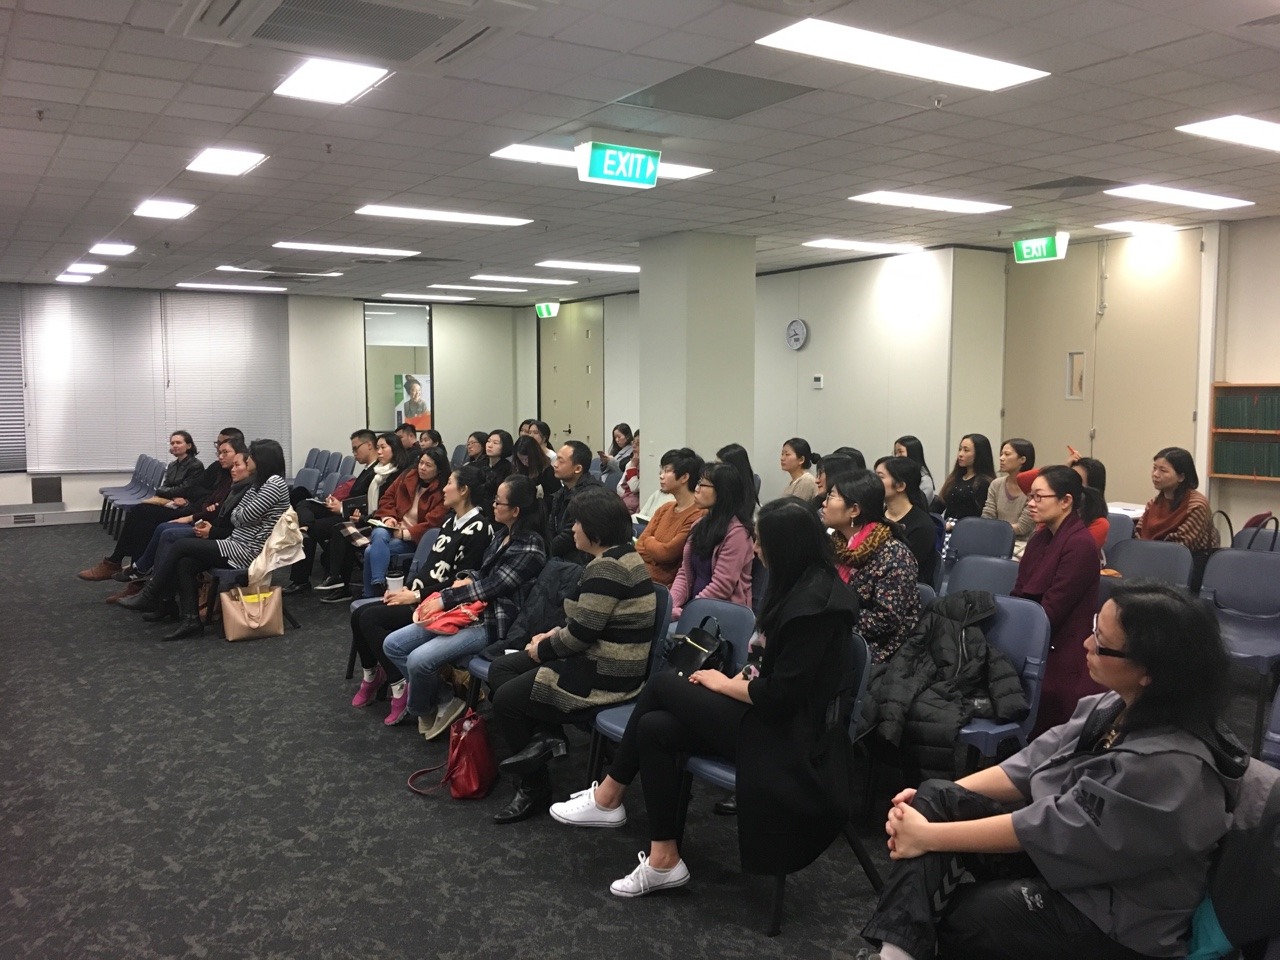 Bridging Translation's interpreters and translators are getting continuously professional training at Chinese Interpreters and Translators Association of Australia